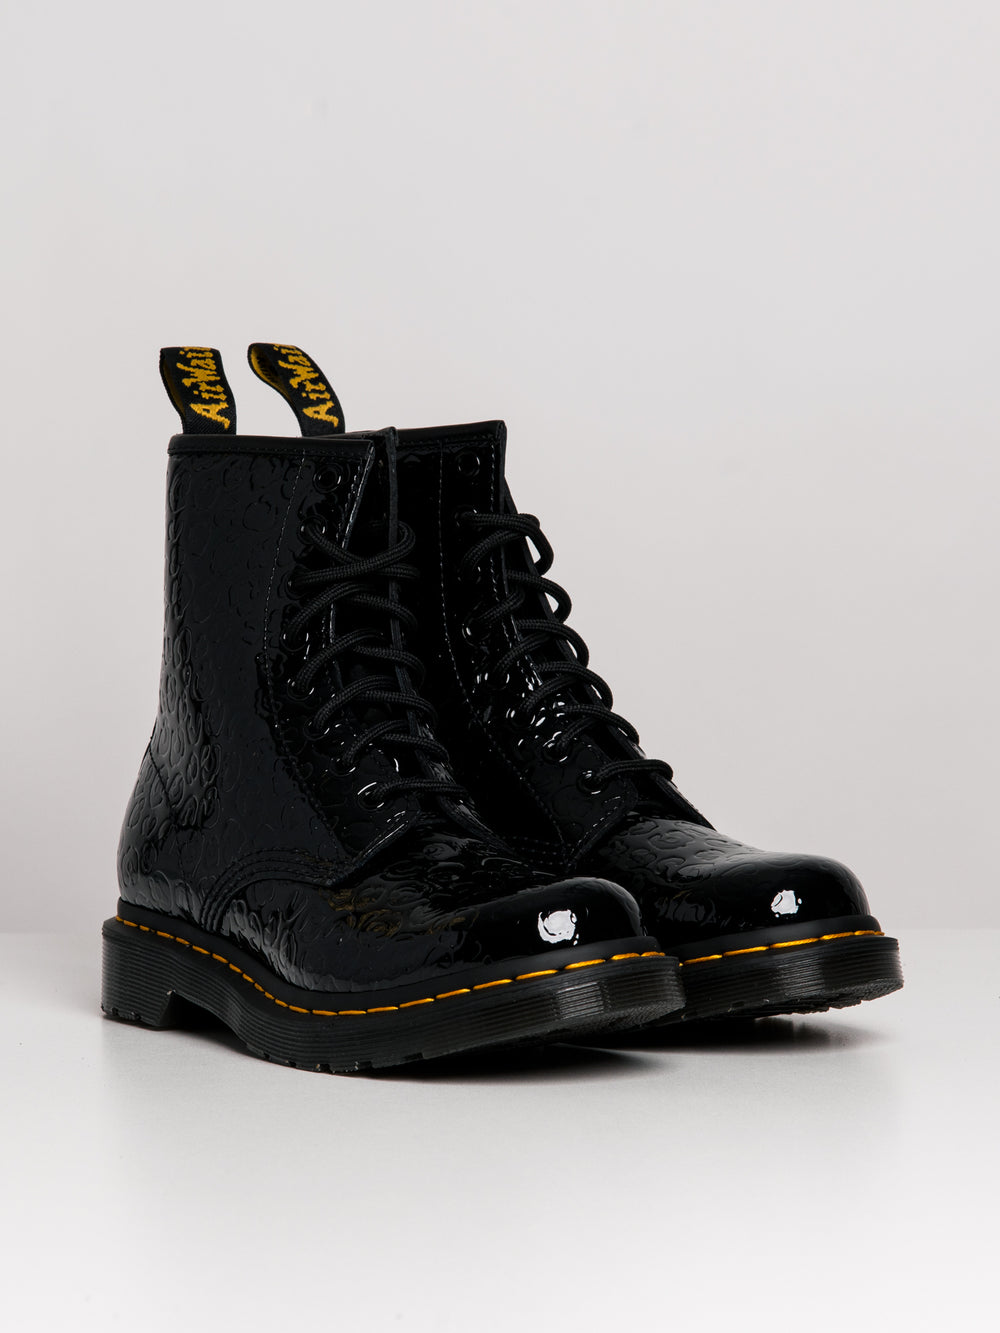 WOMENS DR MARTENS 1460 PATENT EMBOSS LEATHER PLATFORM BOOT - CLEARANCE